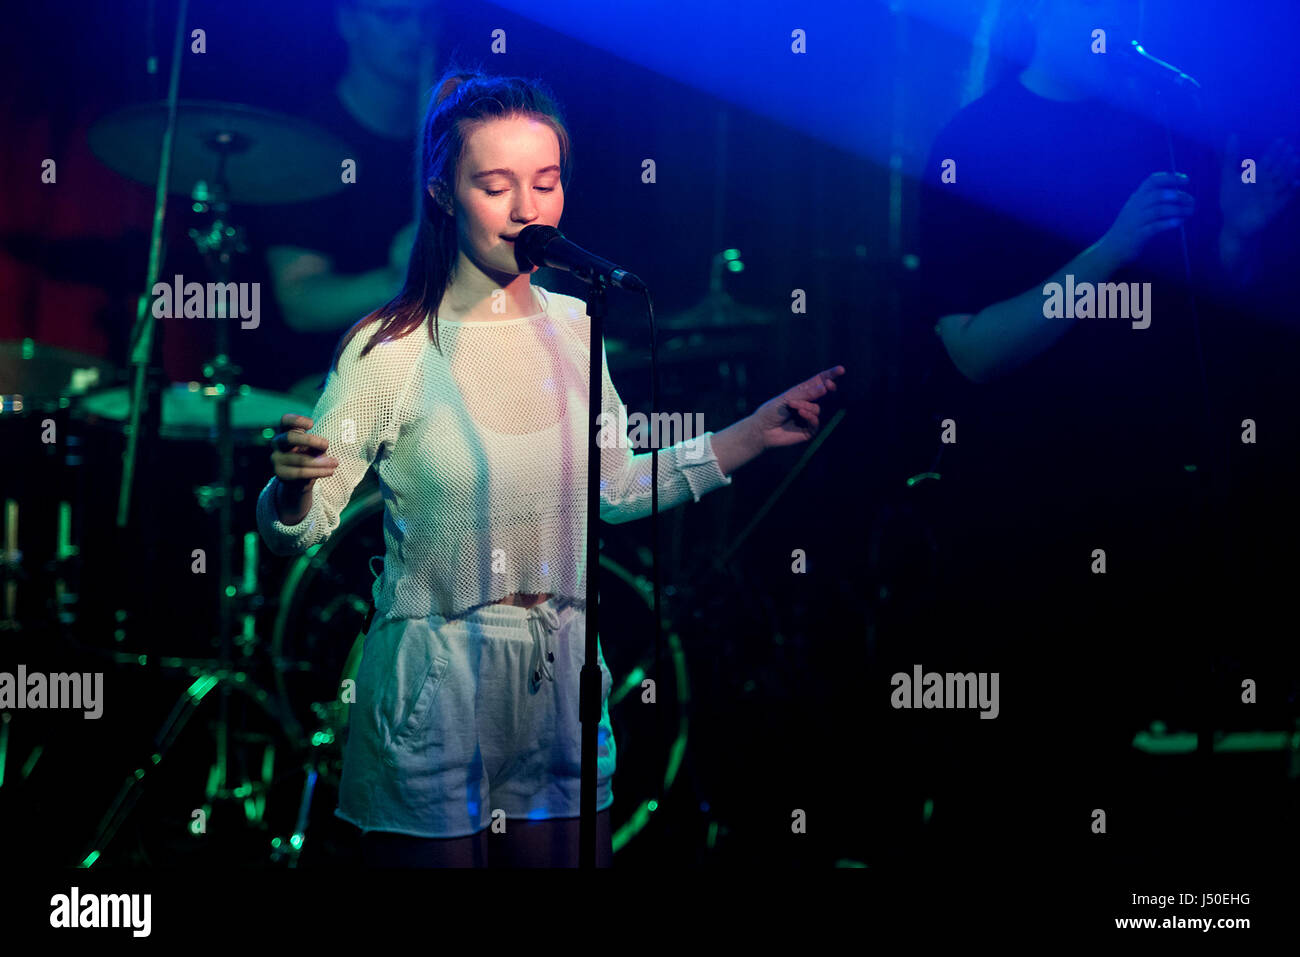 Manchester UK. 15th May 2017. Norweigan singer songwriter Sigrid Solbakk Raabe performs at The Deaf Institute, Manchester UK on her UK tour, Manchester 15/05/2017 © Gary Mather/Alamy Live News Stock Photo